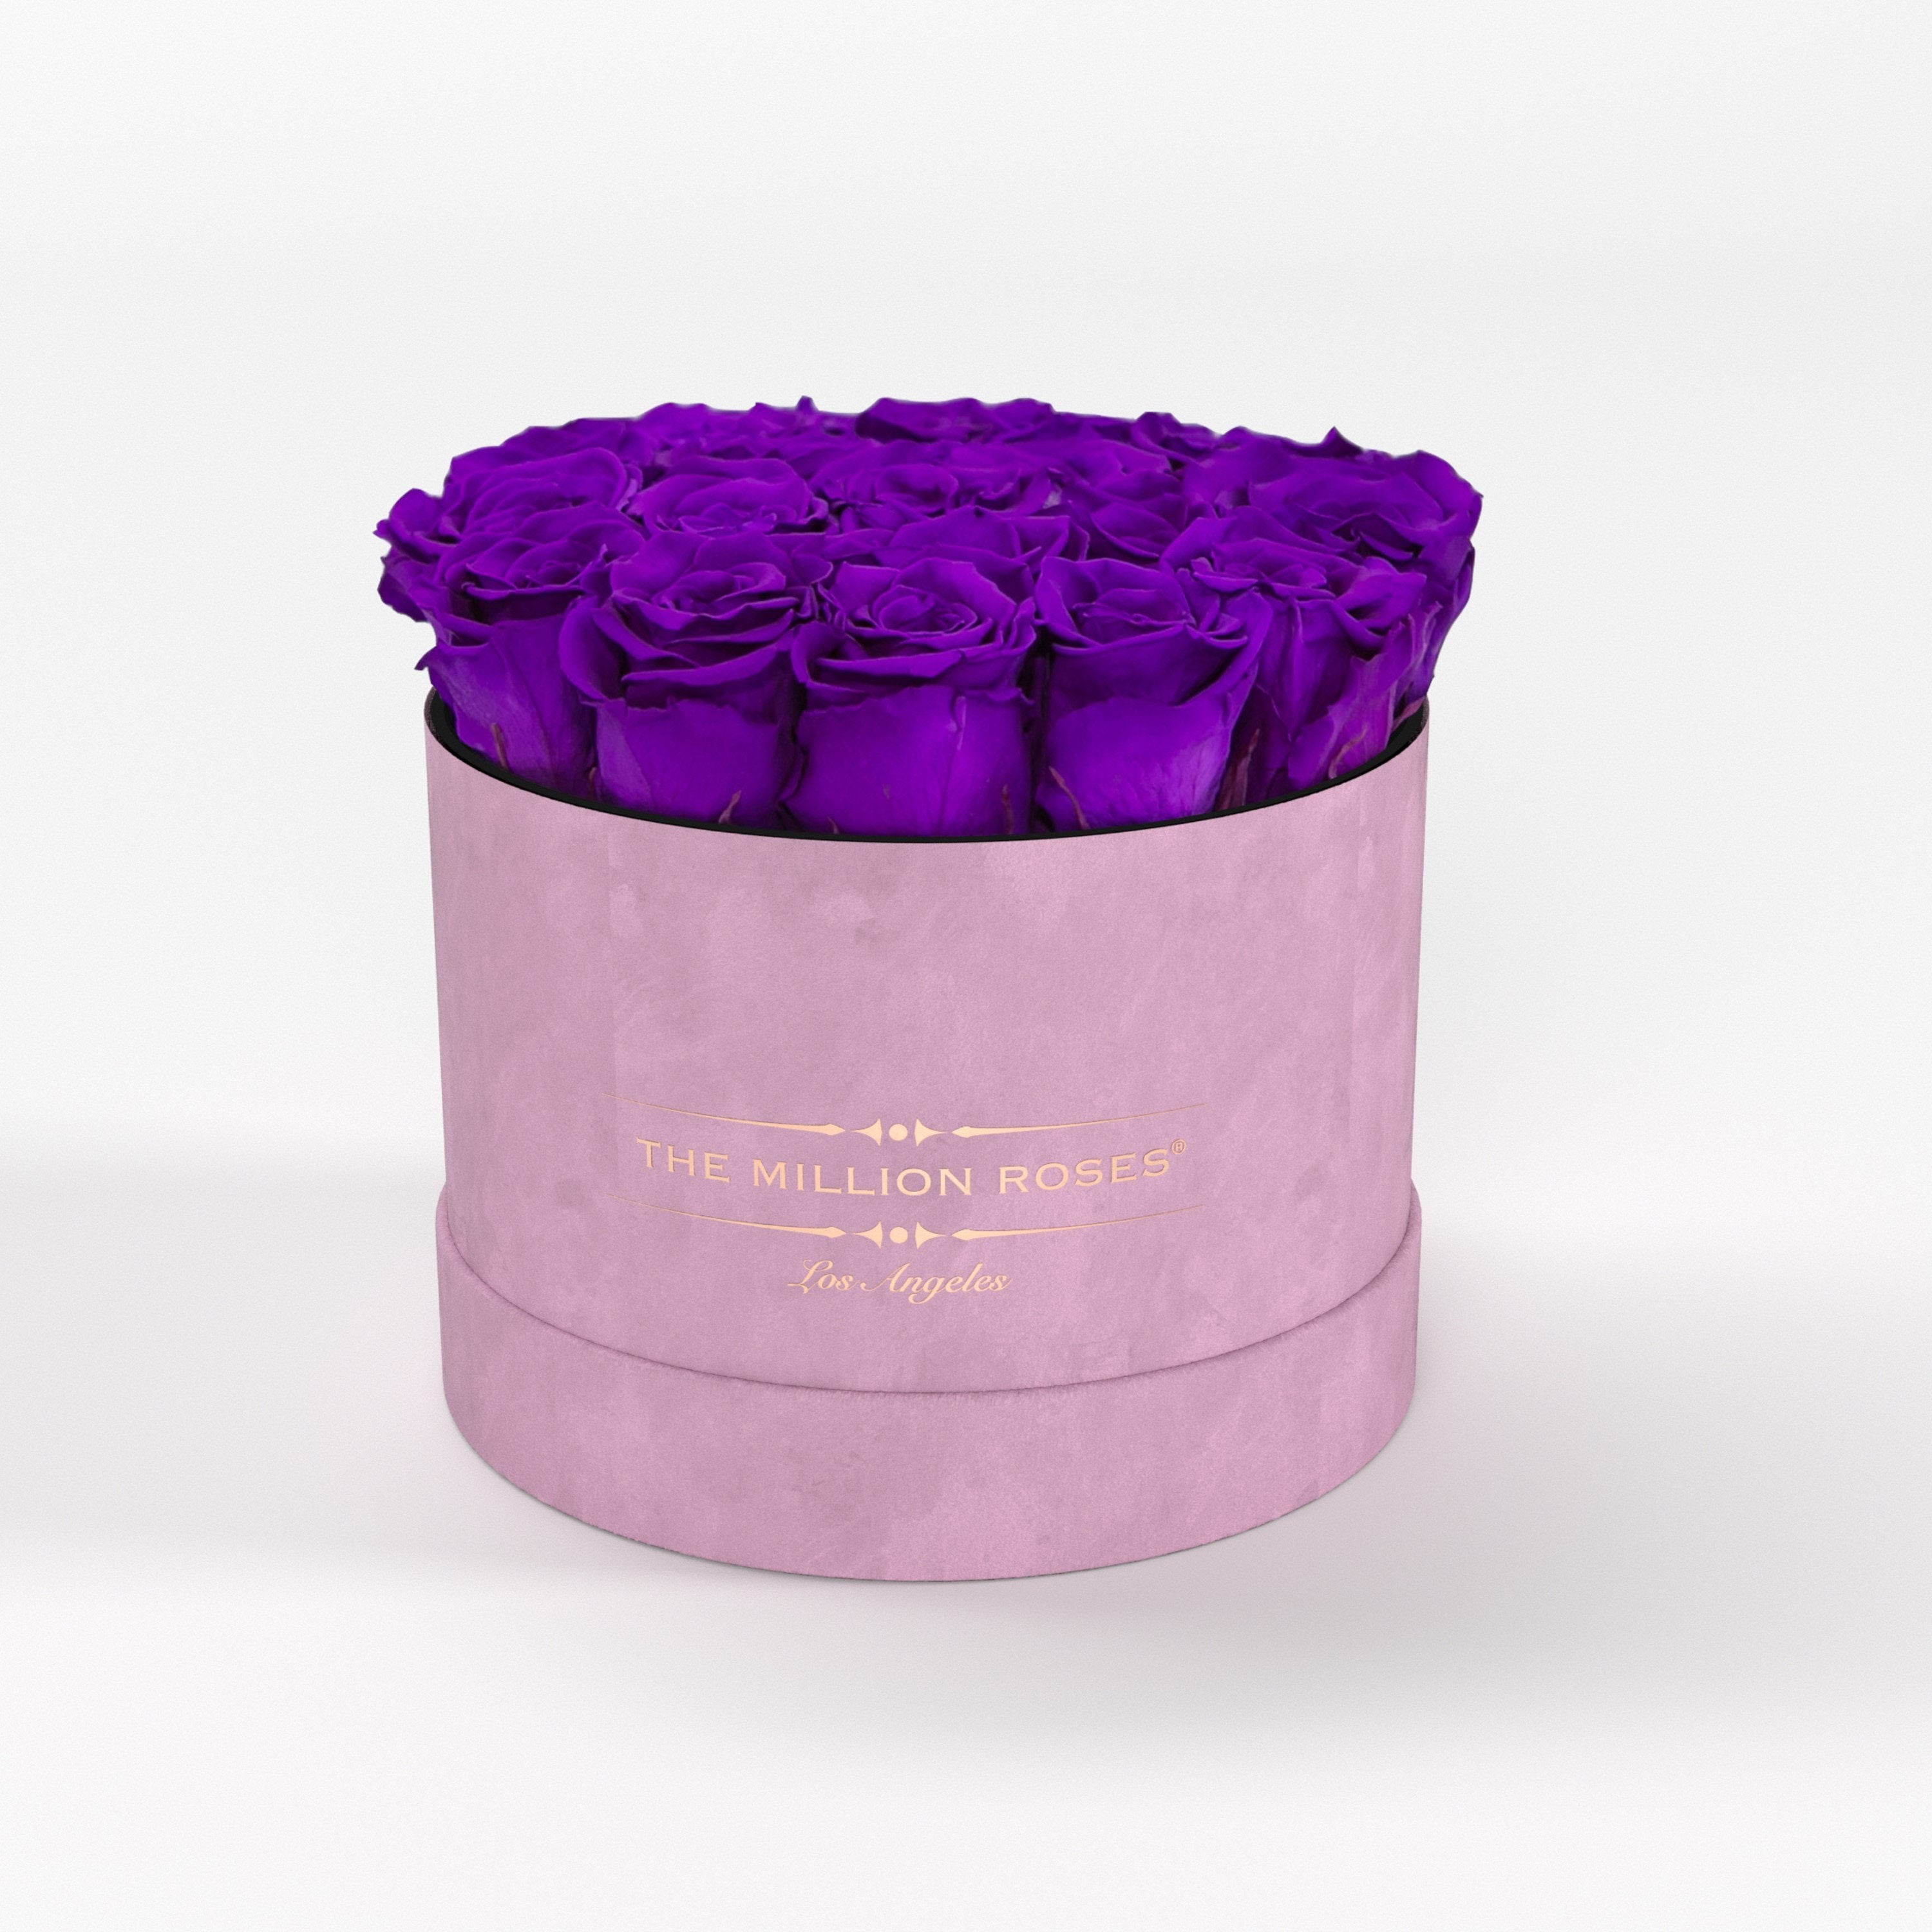 ( LA ) Light Pink - Suede - Classic Box with Bright Purple Roses Kit - the million roses